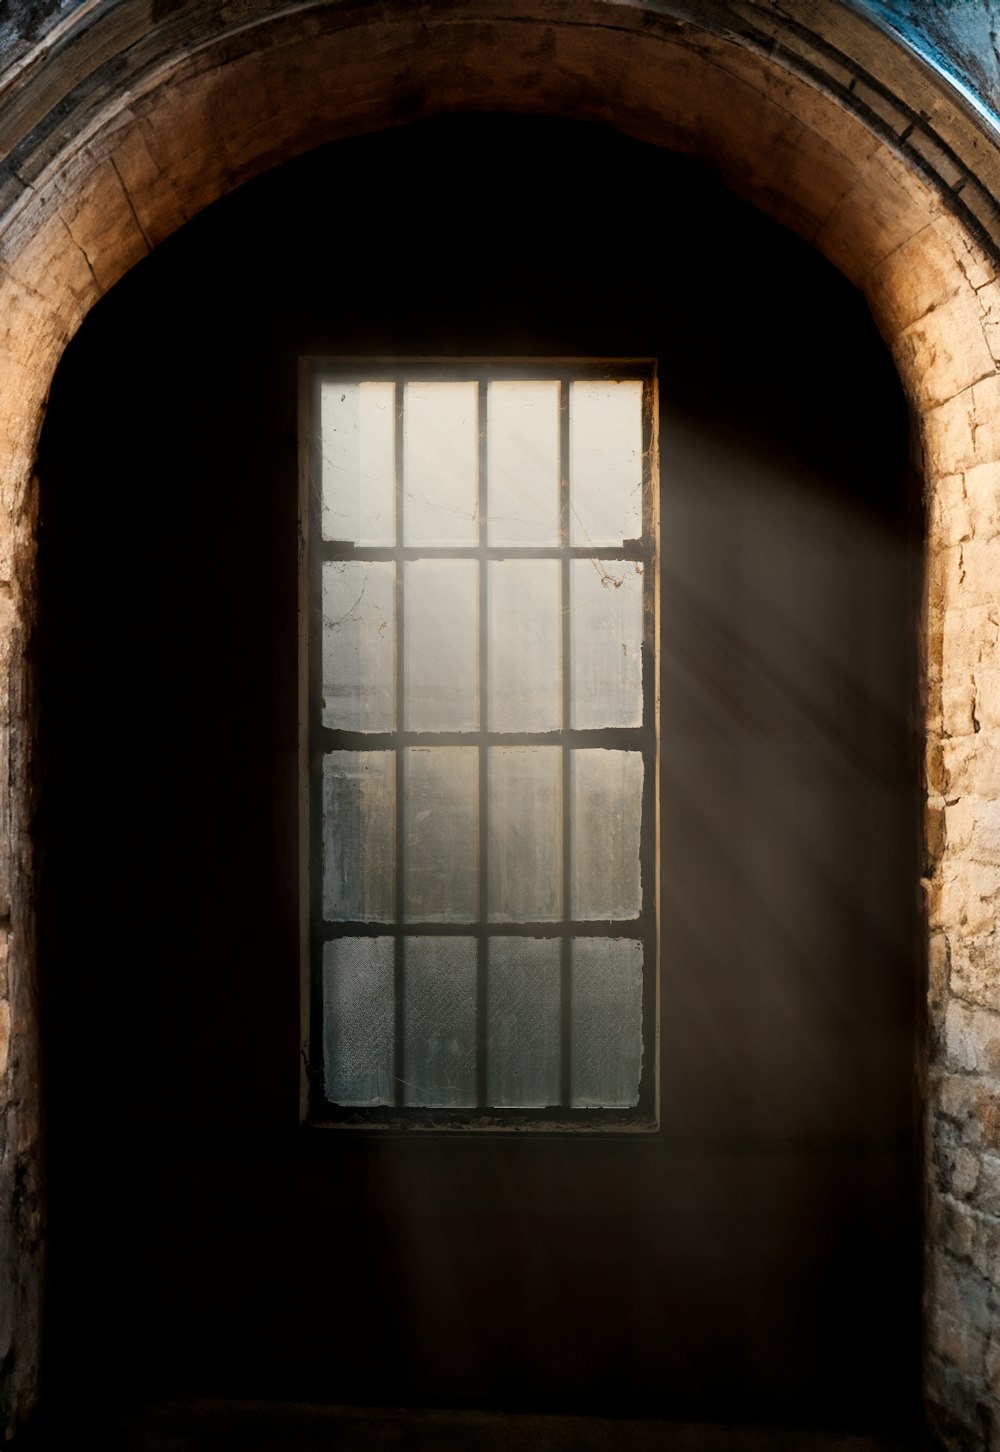 a window in a brick wall with a light coming through it